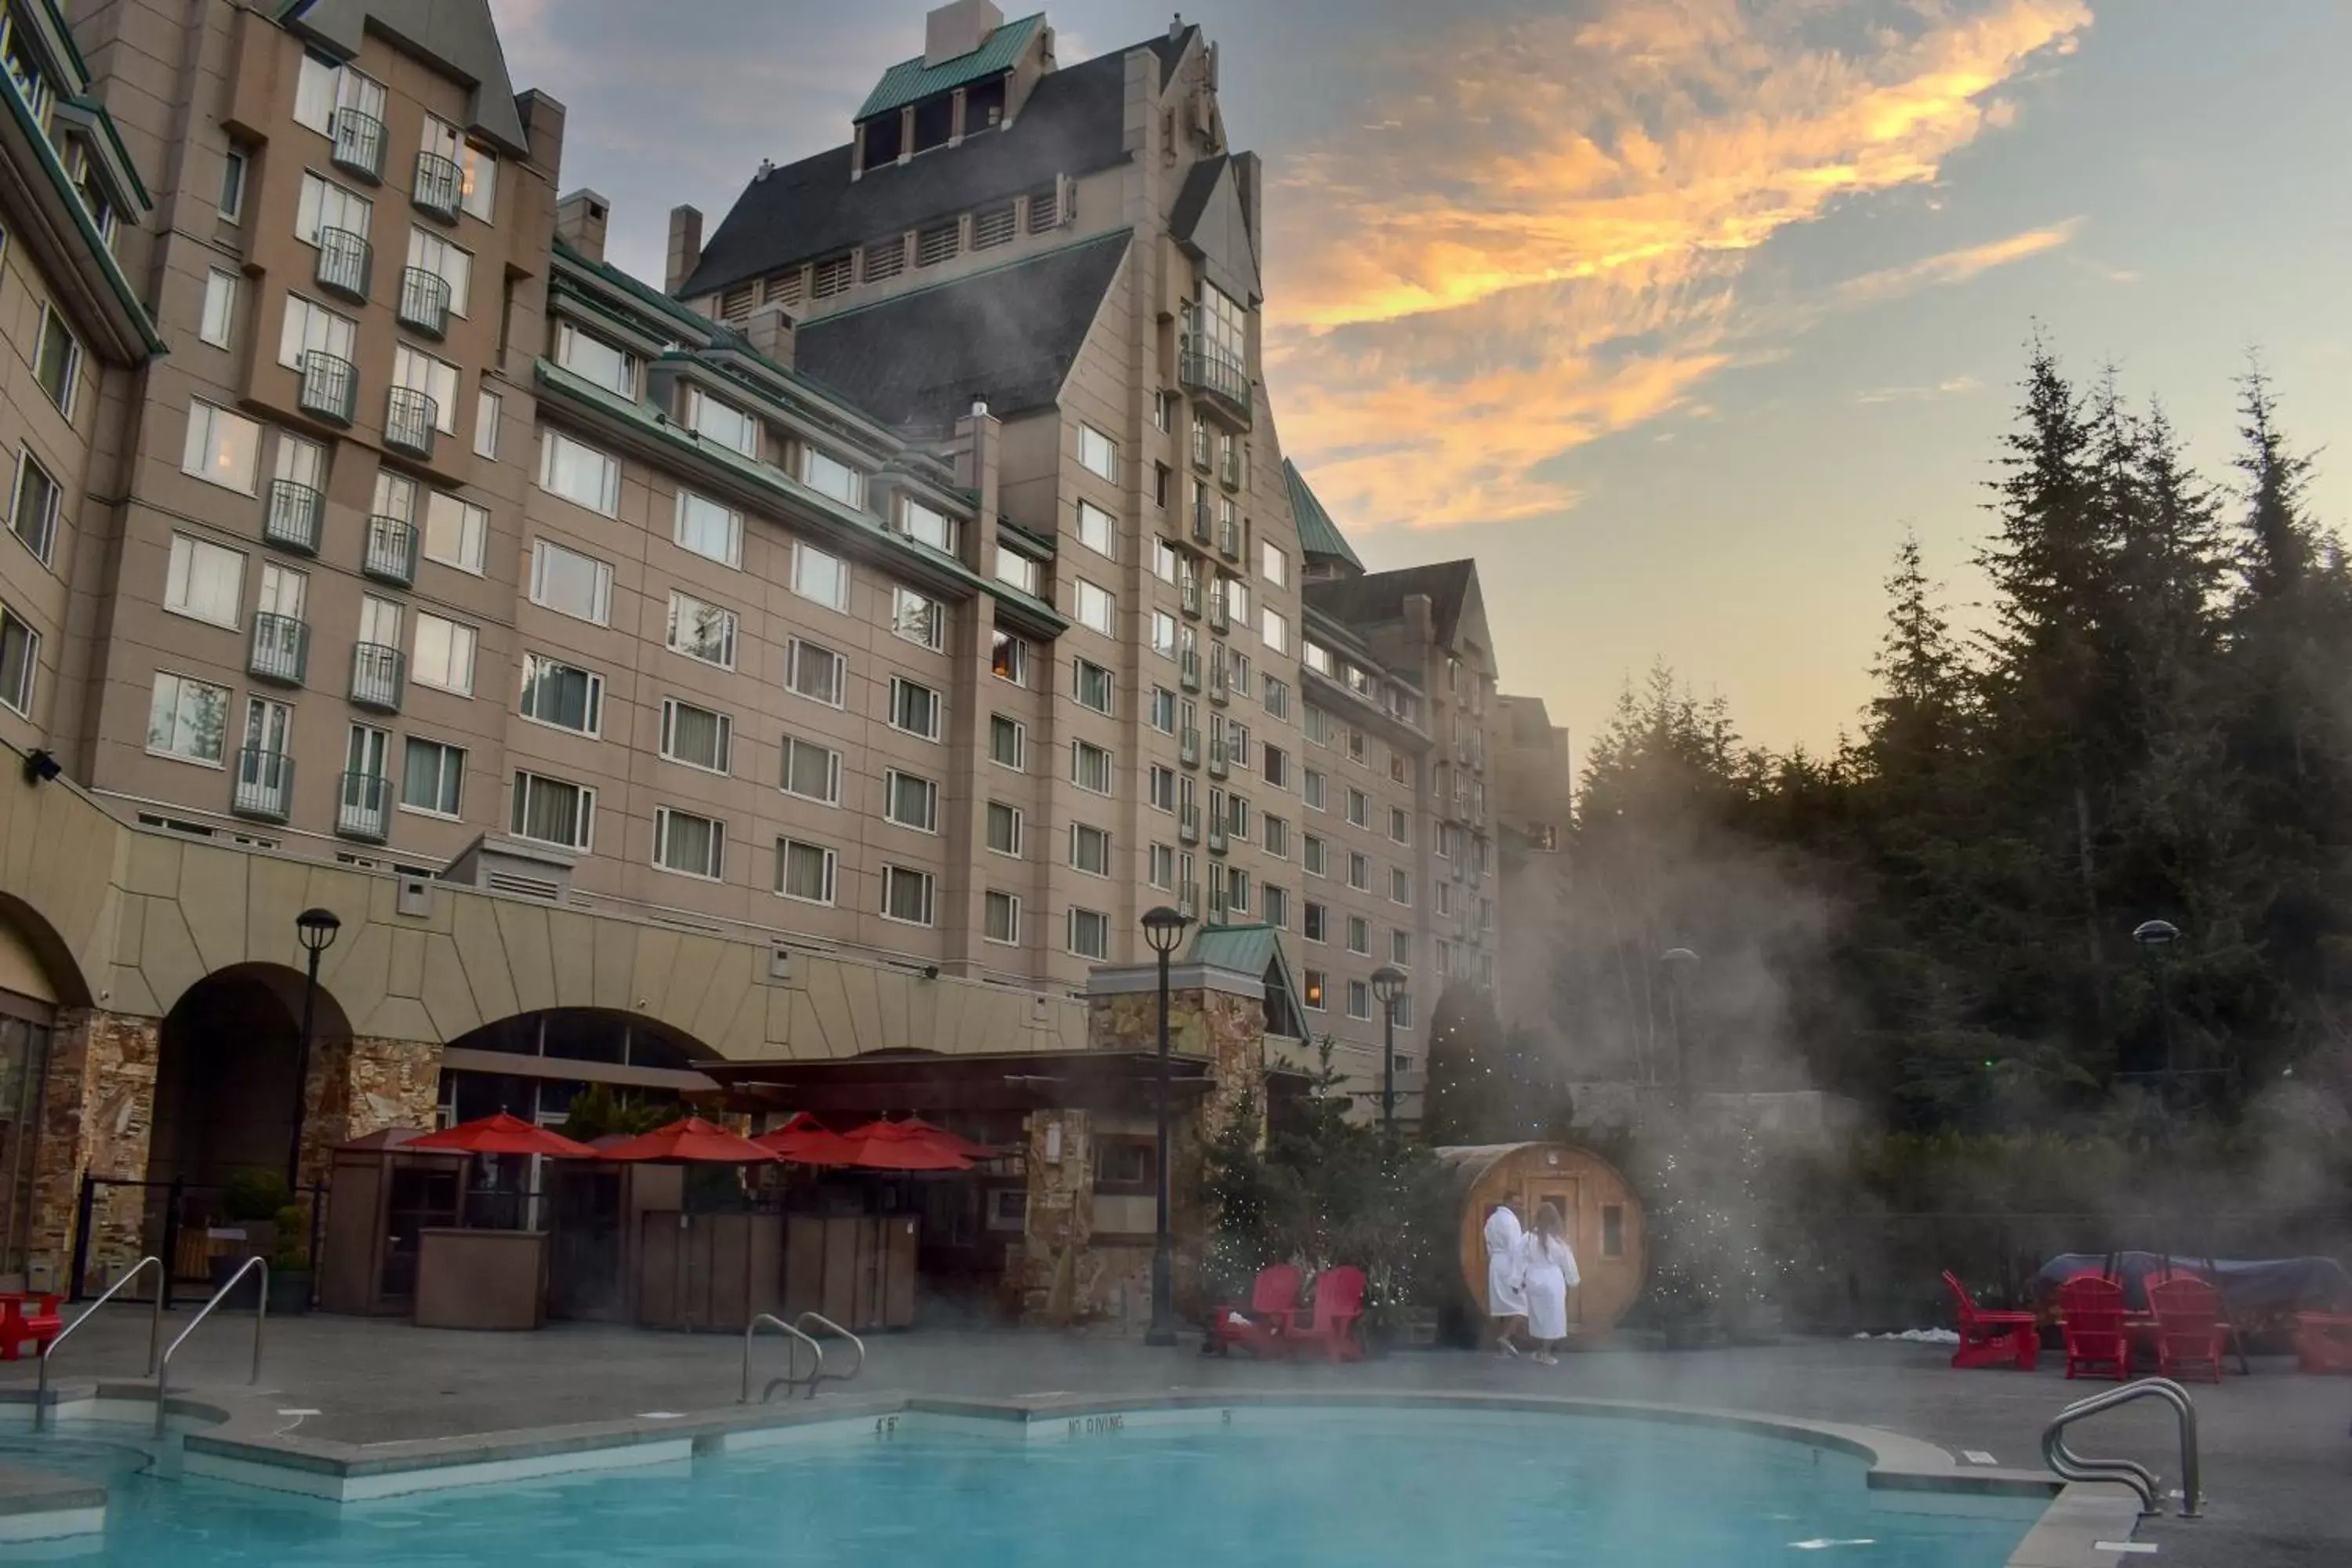 Property building, Swimming Pool in Fairmont Chateau Whistler